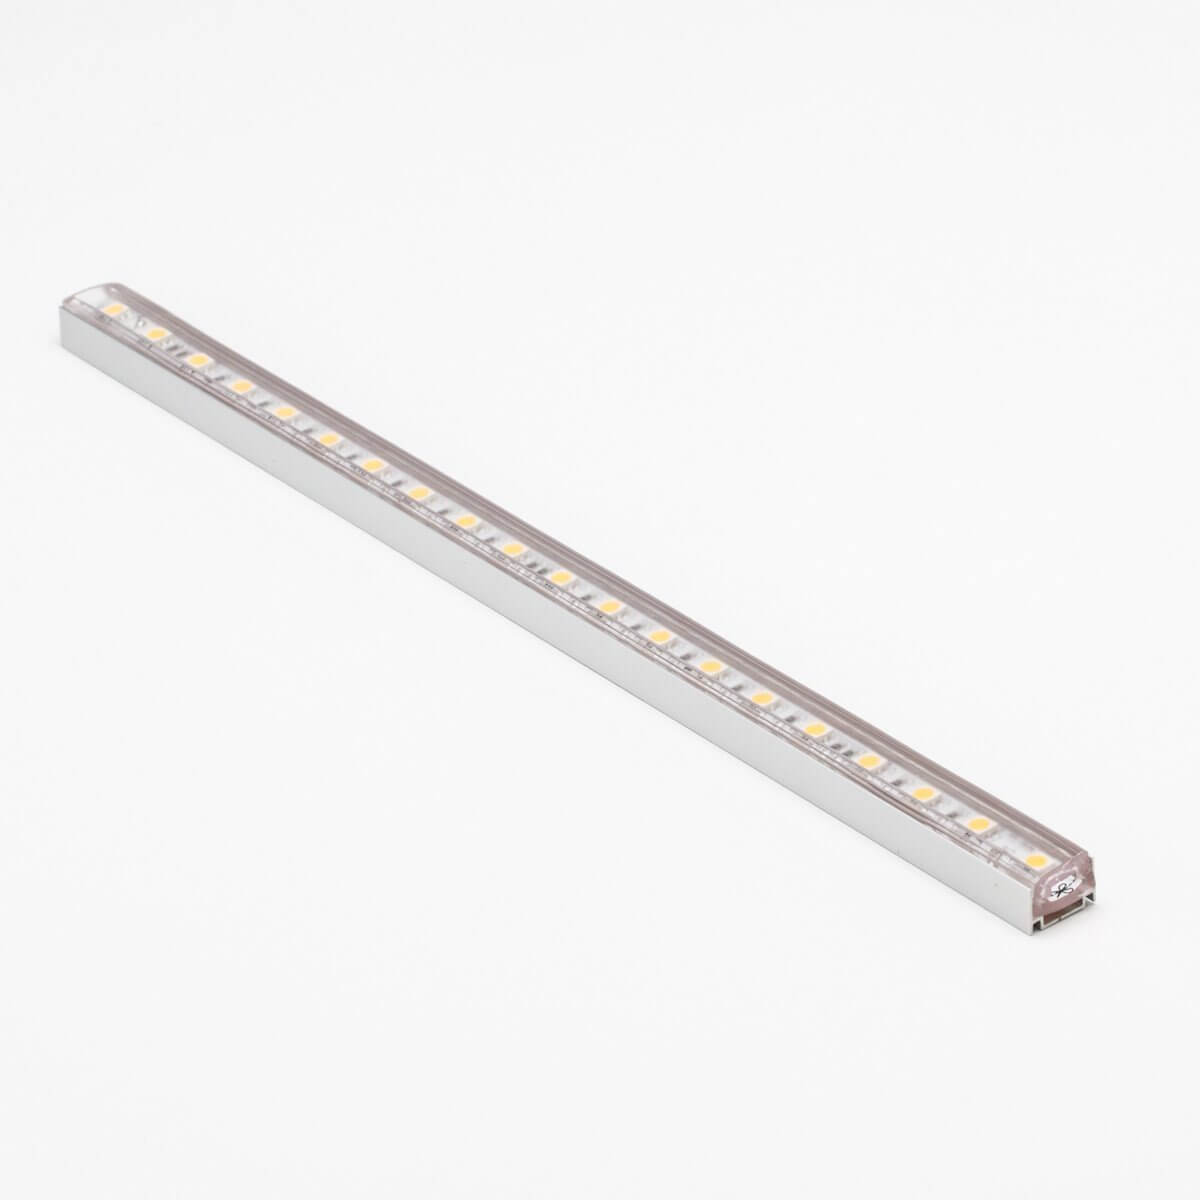 led strip light with yellow chips laid into aluminum led channel